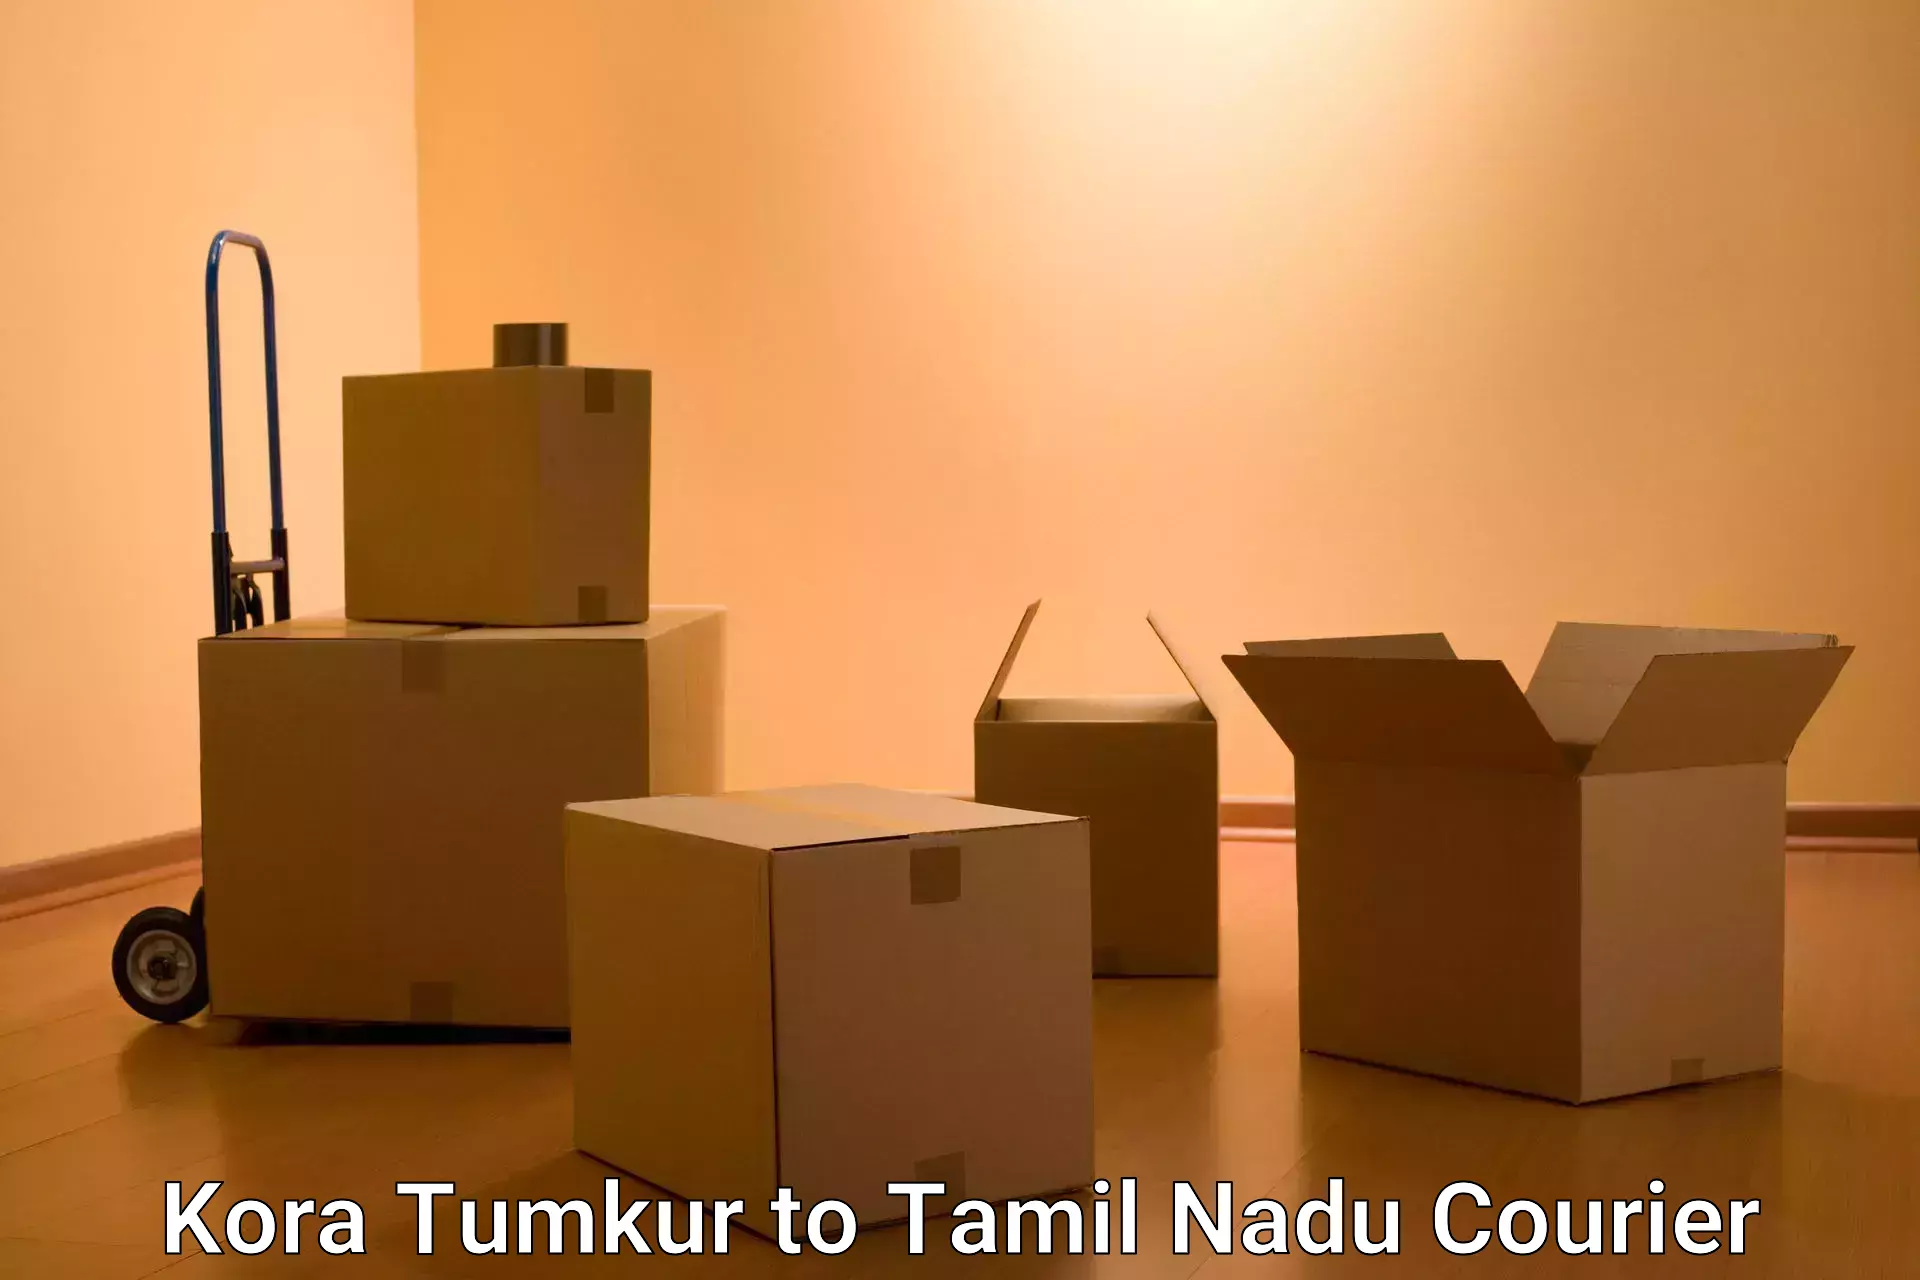 Lightweight parcel options Kora Tumkur to Saveetha Institute of Medical and Technical Sciences Chennai